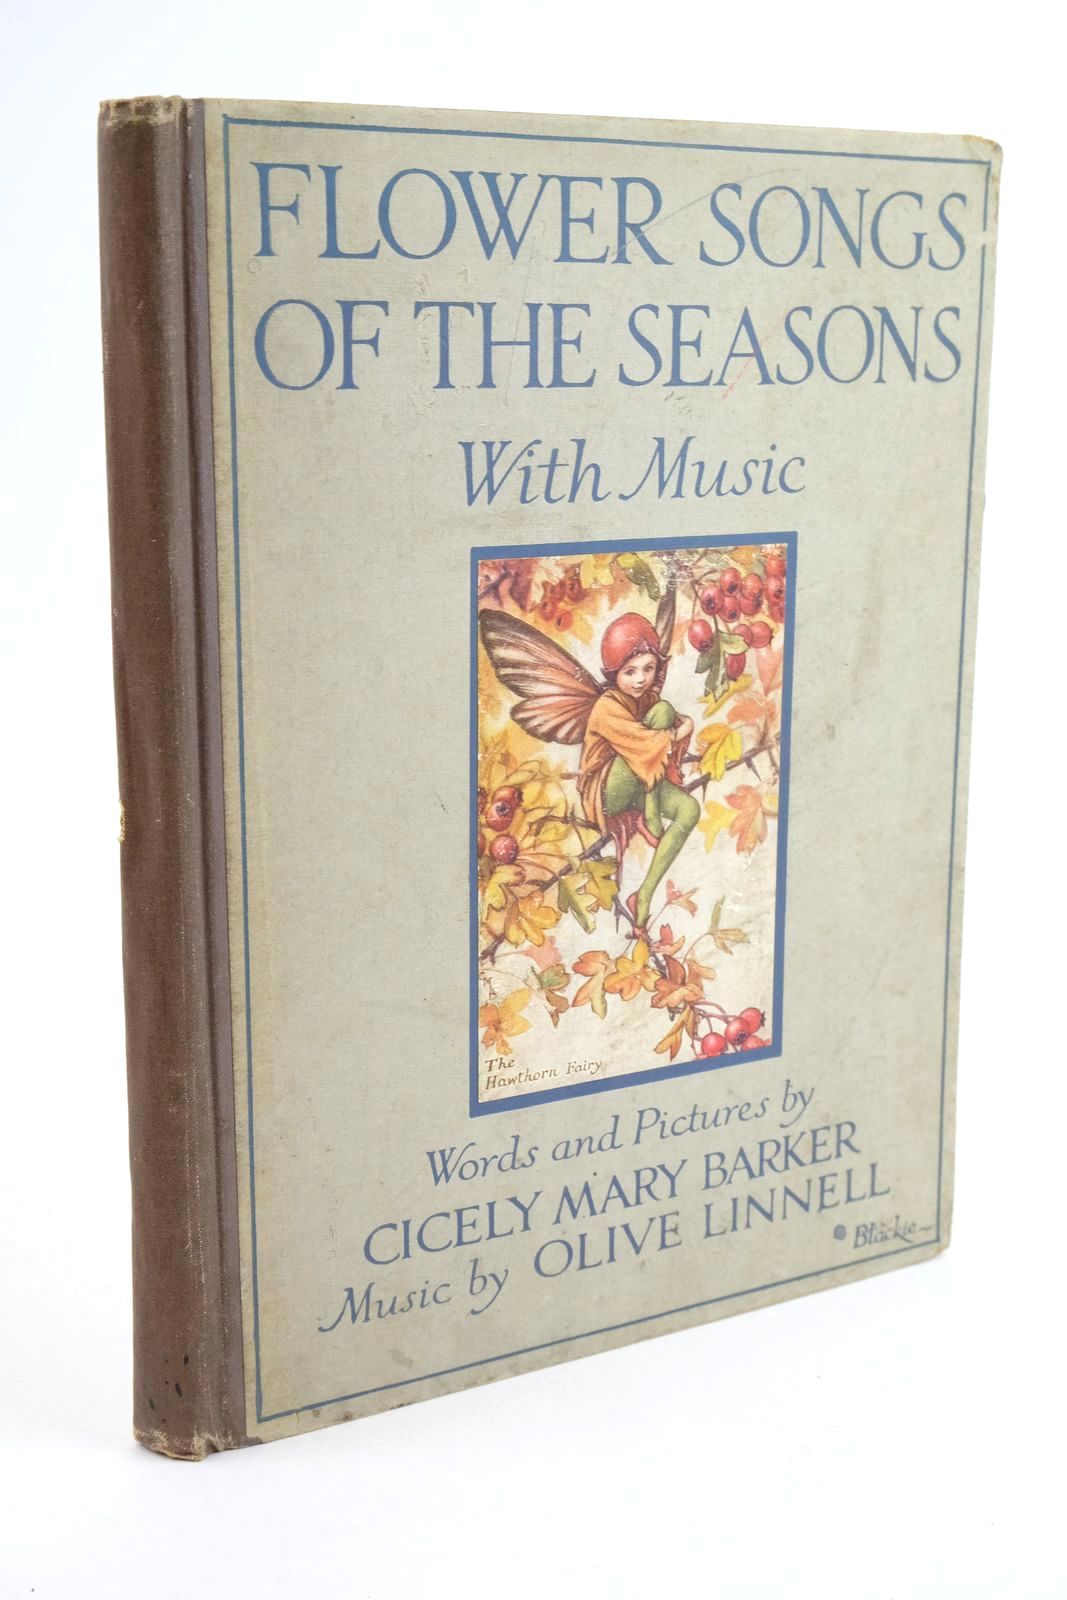 Photo of FLOWER SONGS OF THE SEASONS written by Barker, Cicely Mary Linnell, Olive illustrated by Barker, Cicely Mary published by Blackie &amp; Son Ltd. (STOCK CODE: 1323743)  for sale by Stella & Rose's Books